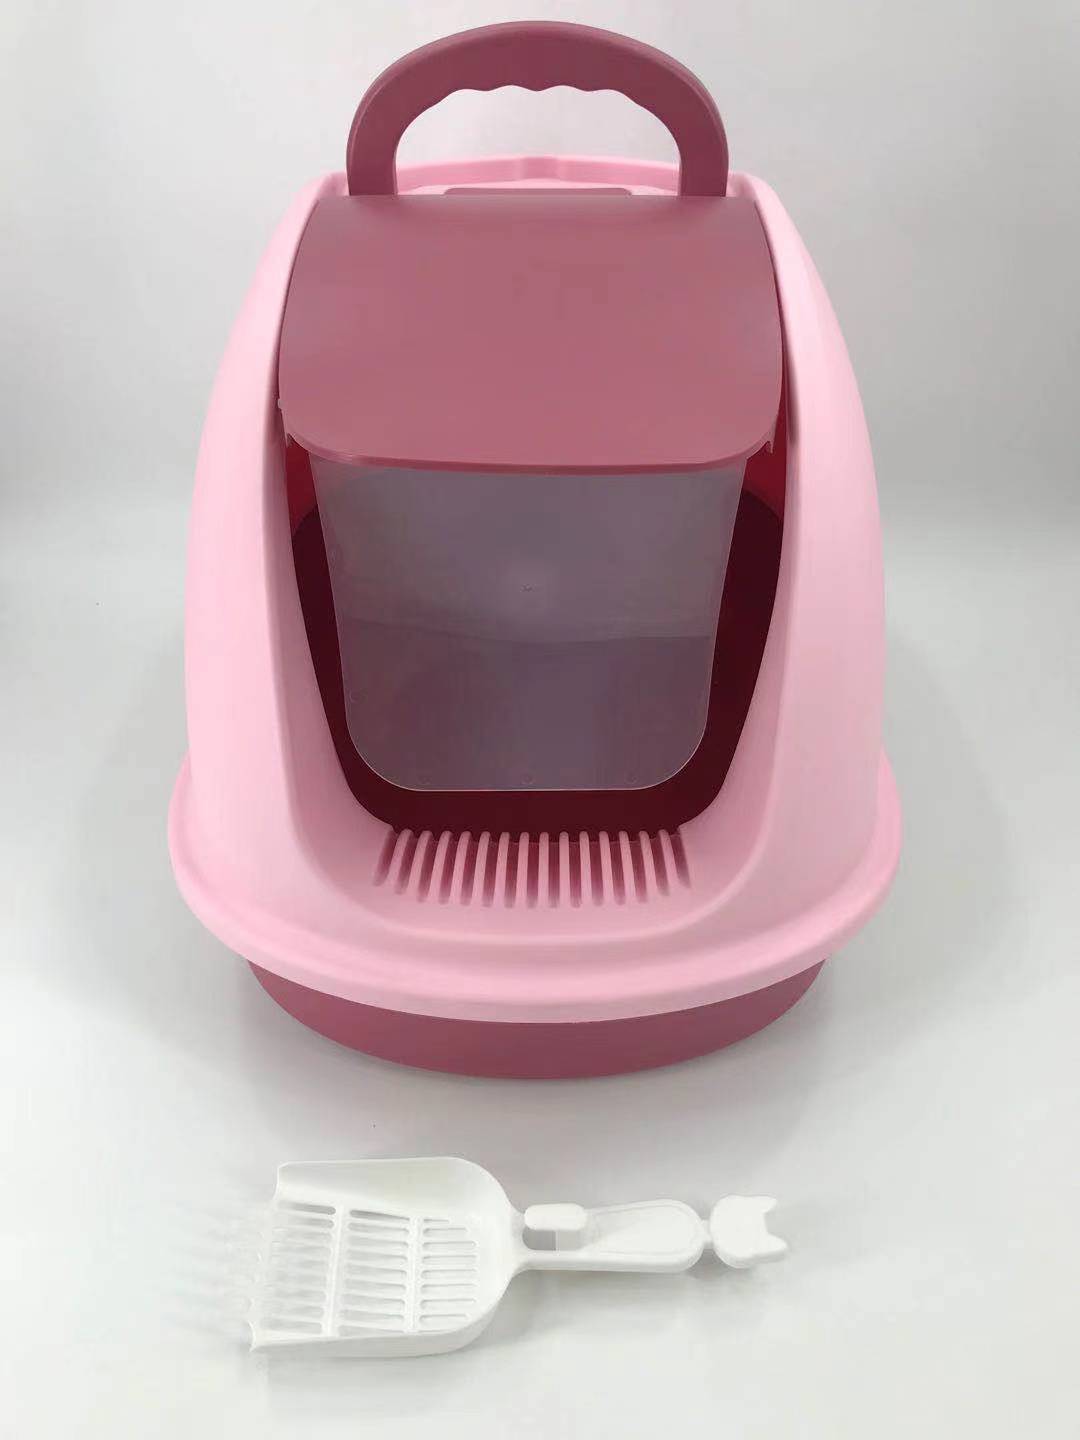 YES4PETS XL Portable Hooded Cat Toilet Litter Box Tray House with Charcoal Filter and Scoop Pink